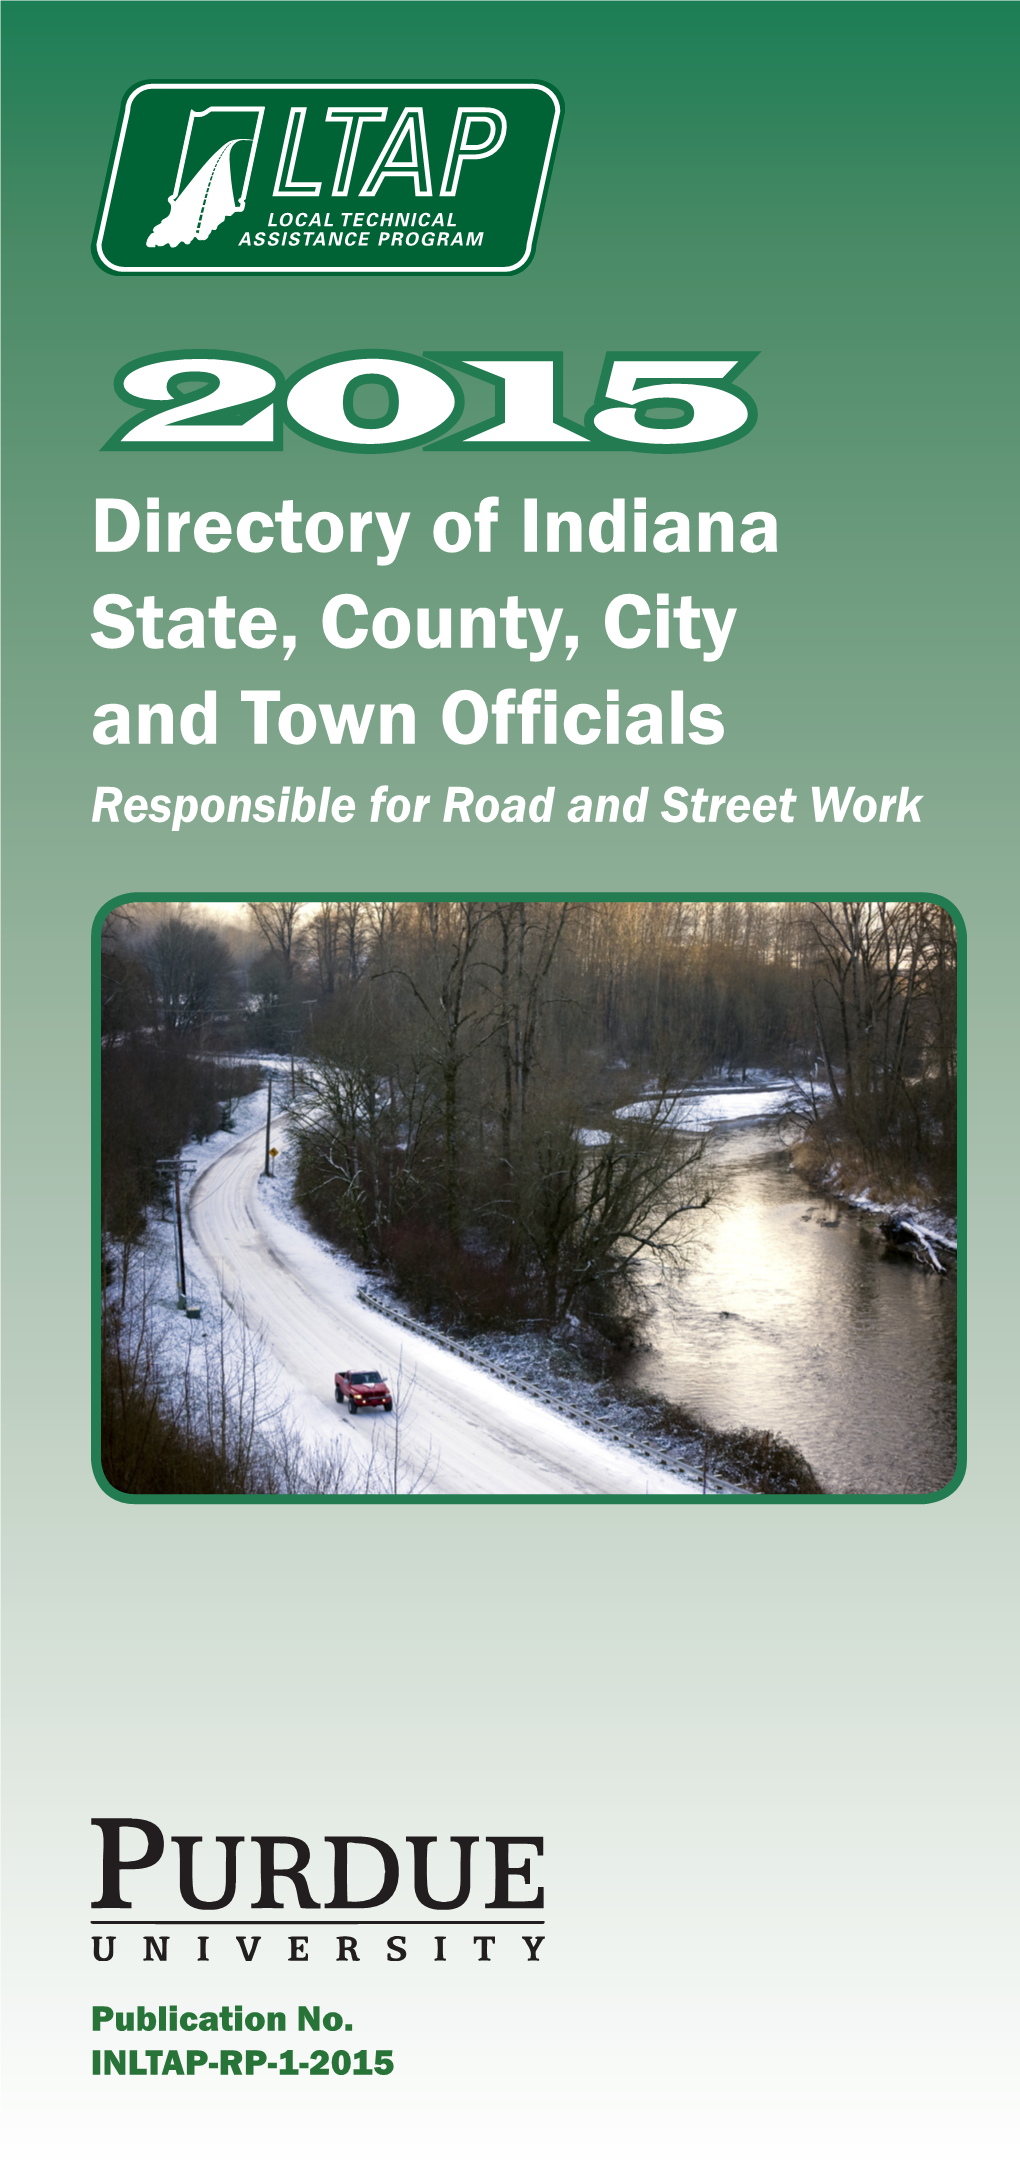 2015 Directory of Indiana State, County, City and Town Officials Responsible for Road and Street Work